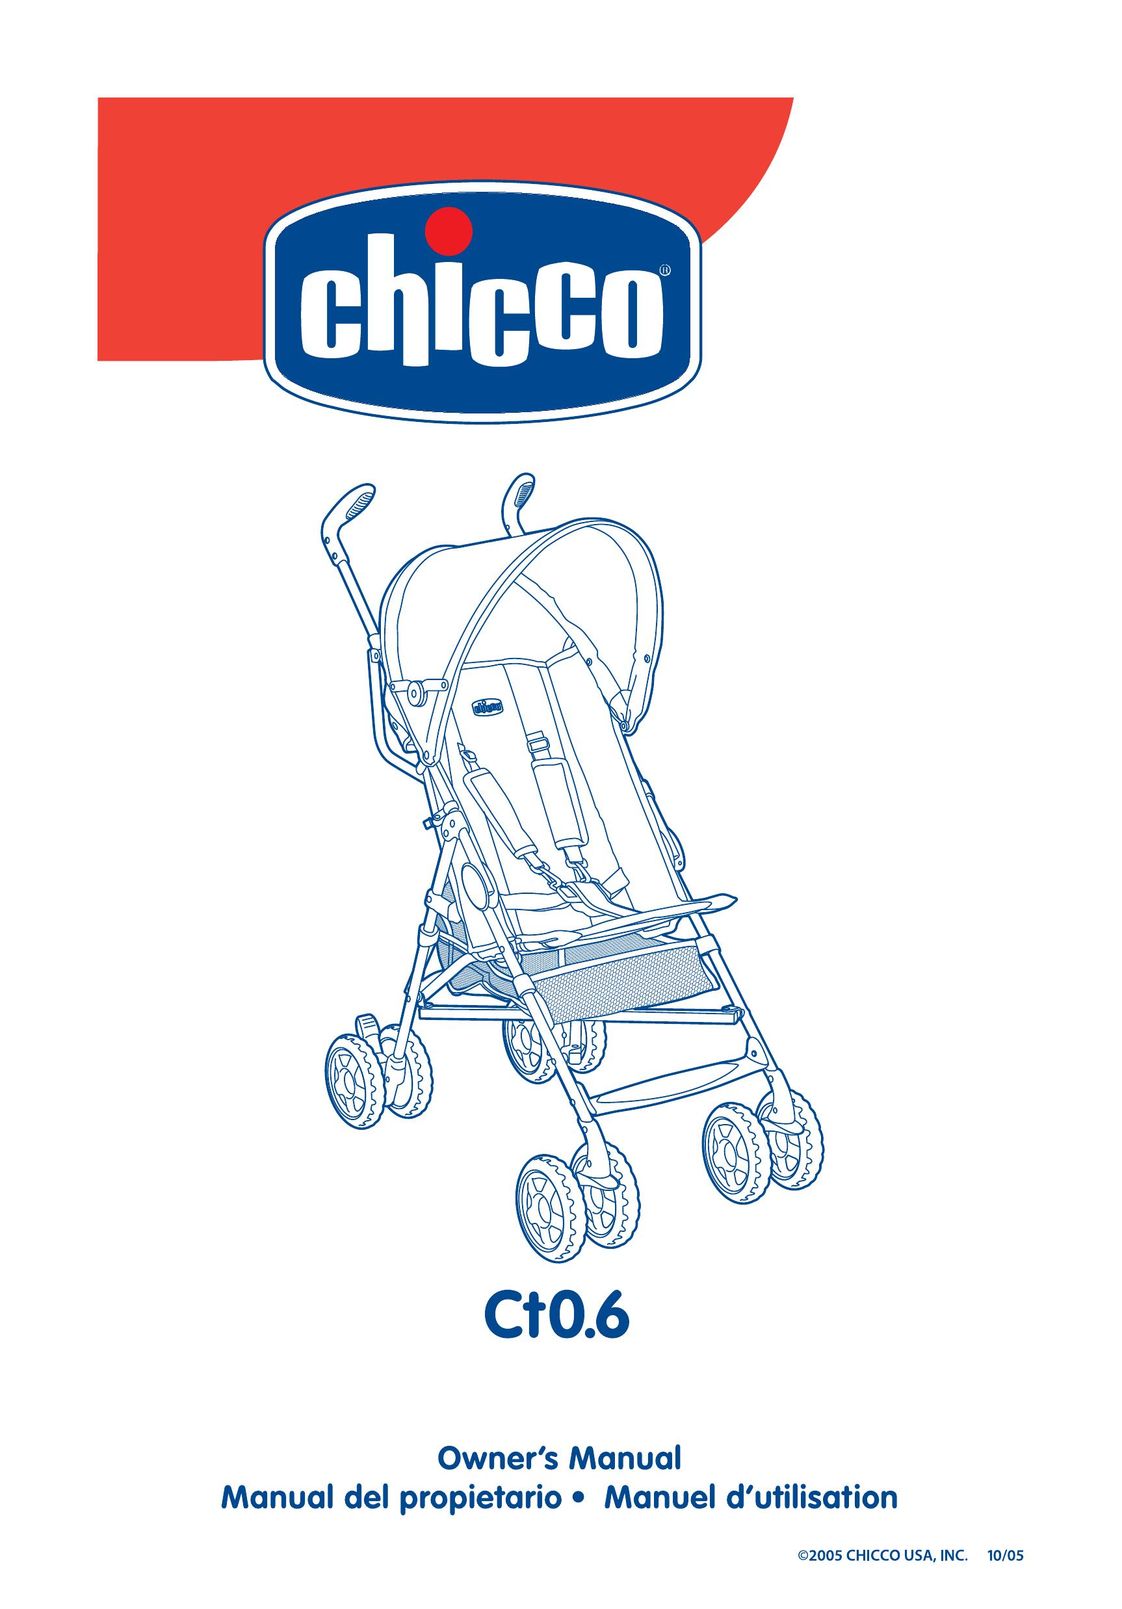 Chicco ct0.6 Stroller User Manual